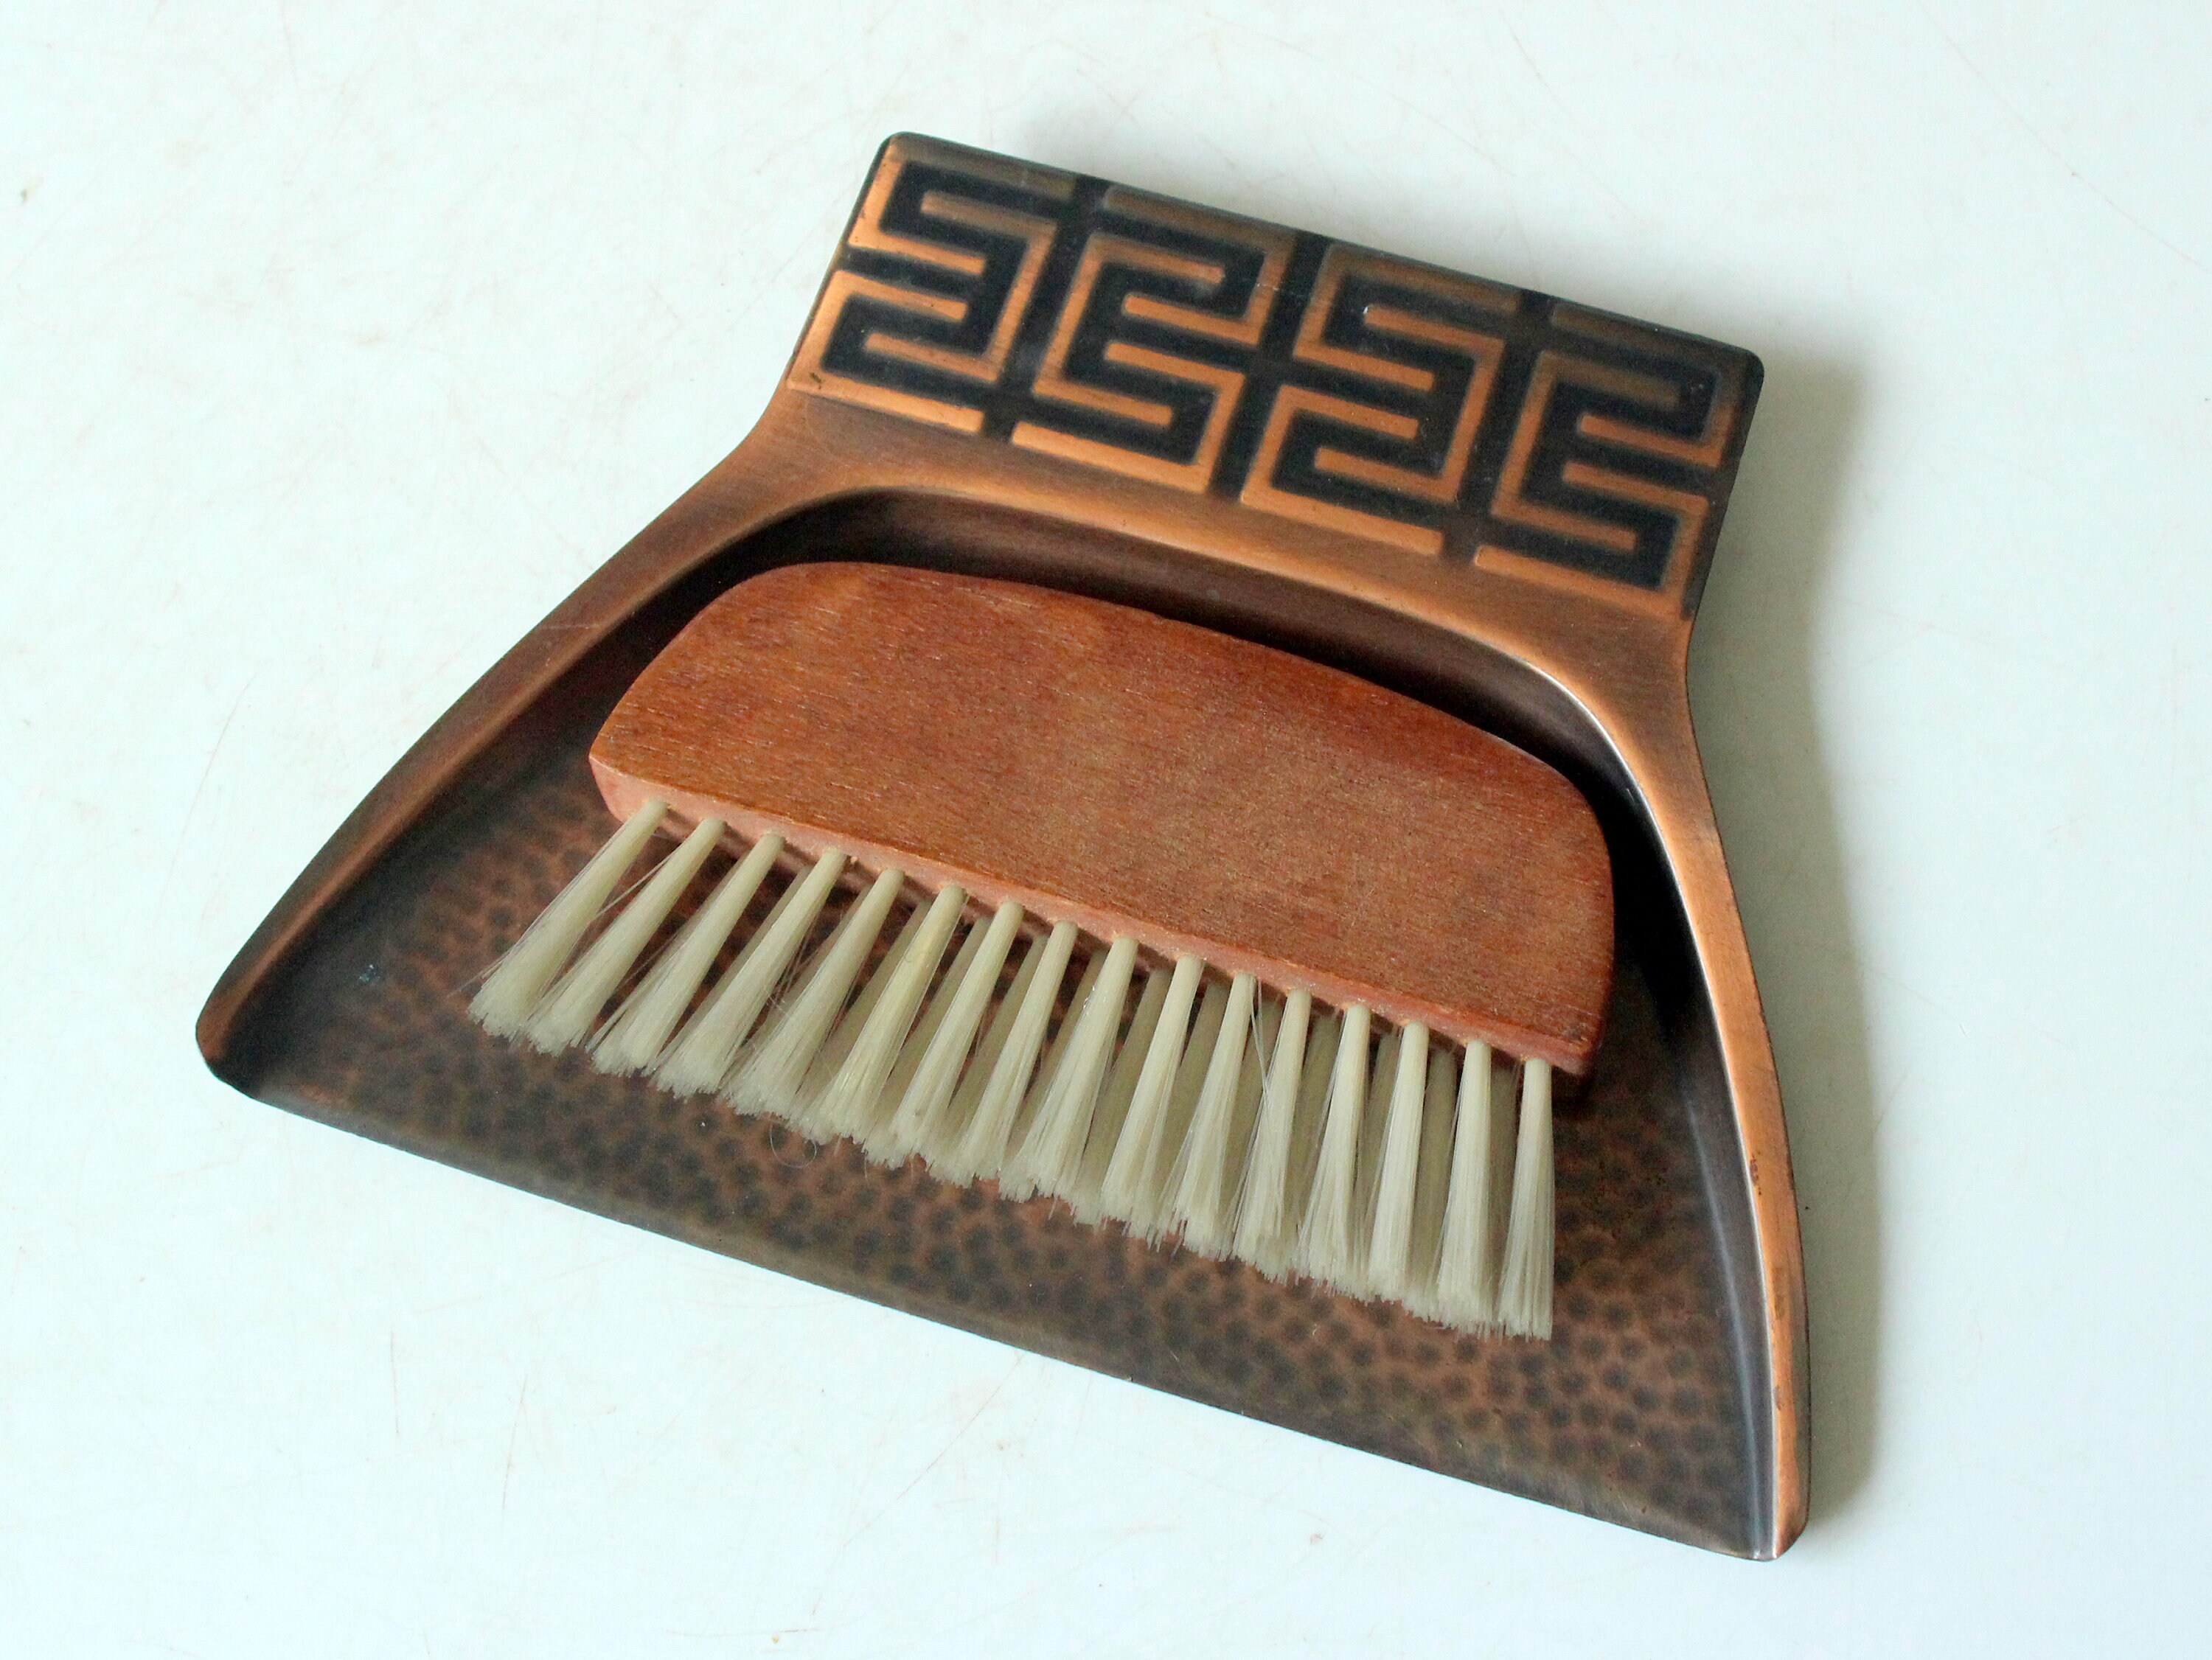 Wooden Table Crumb Brush